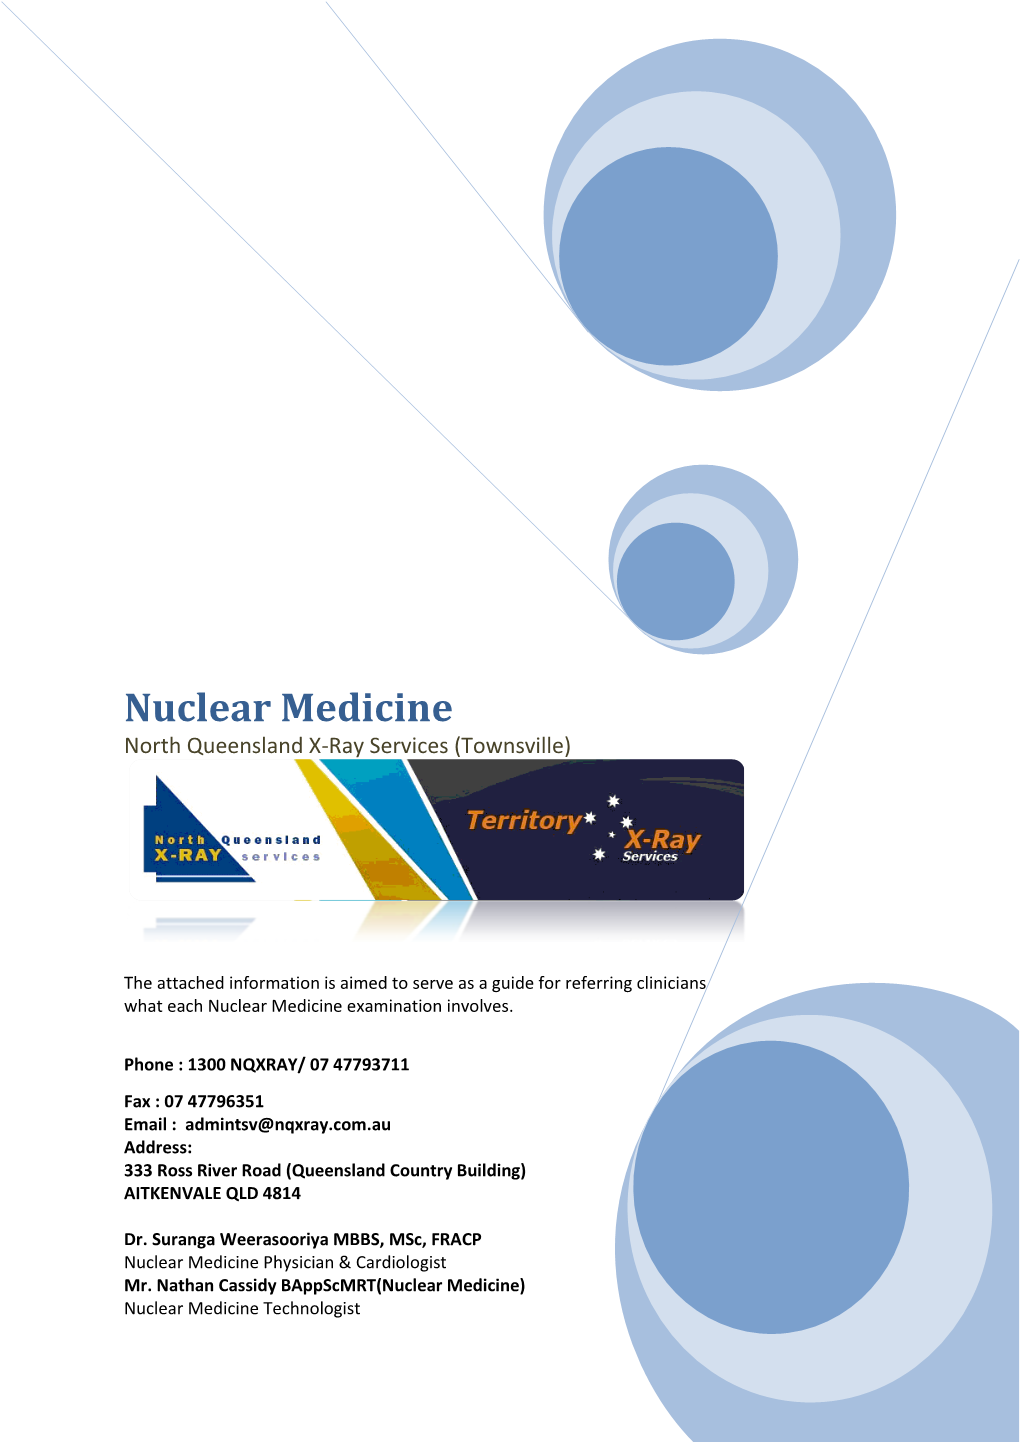 Nuclear Medicine North Queensland X-Ray Services (Townsville)